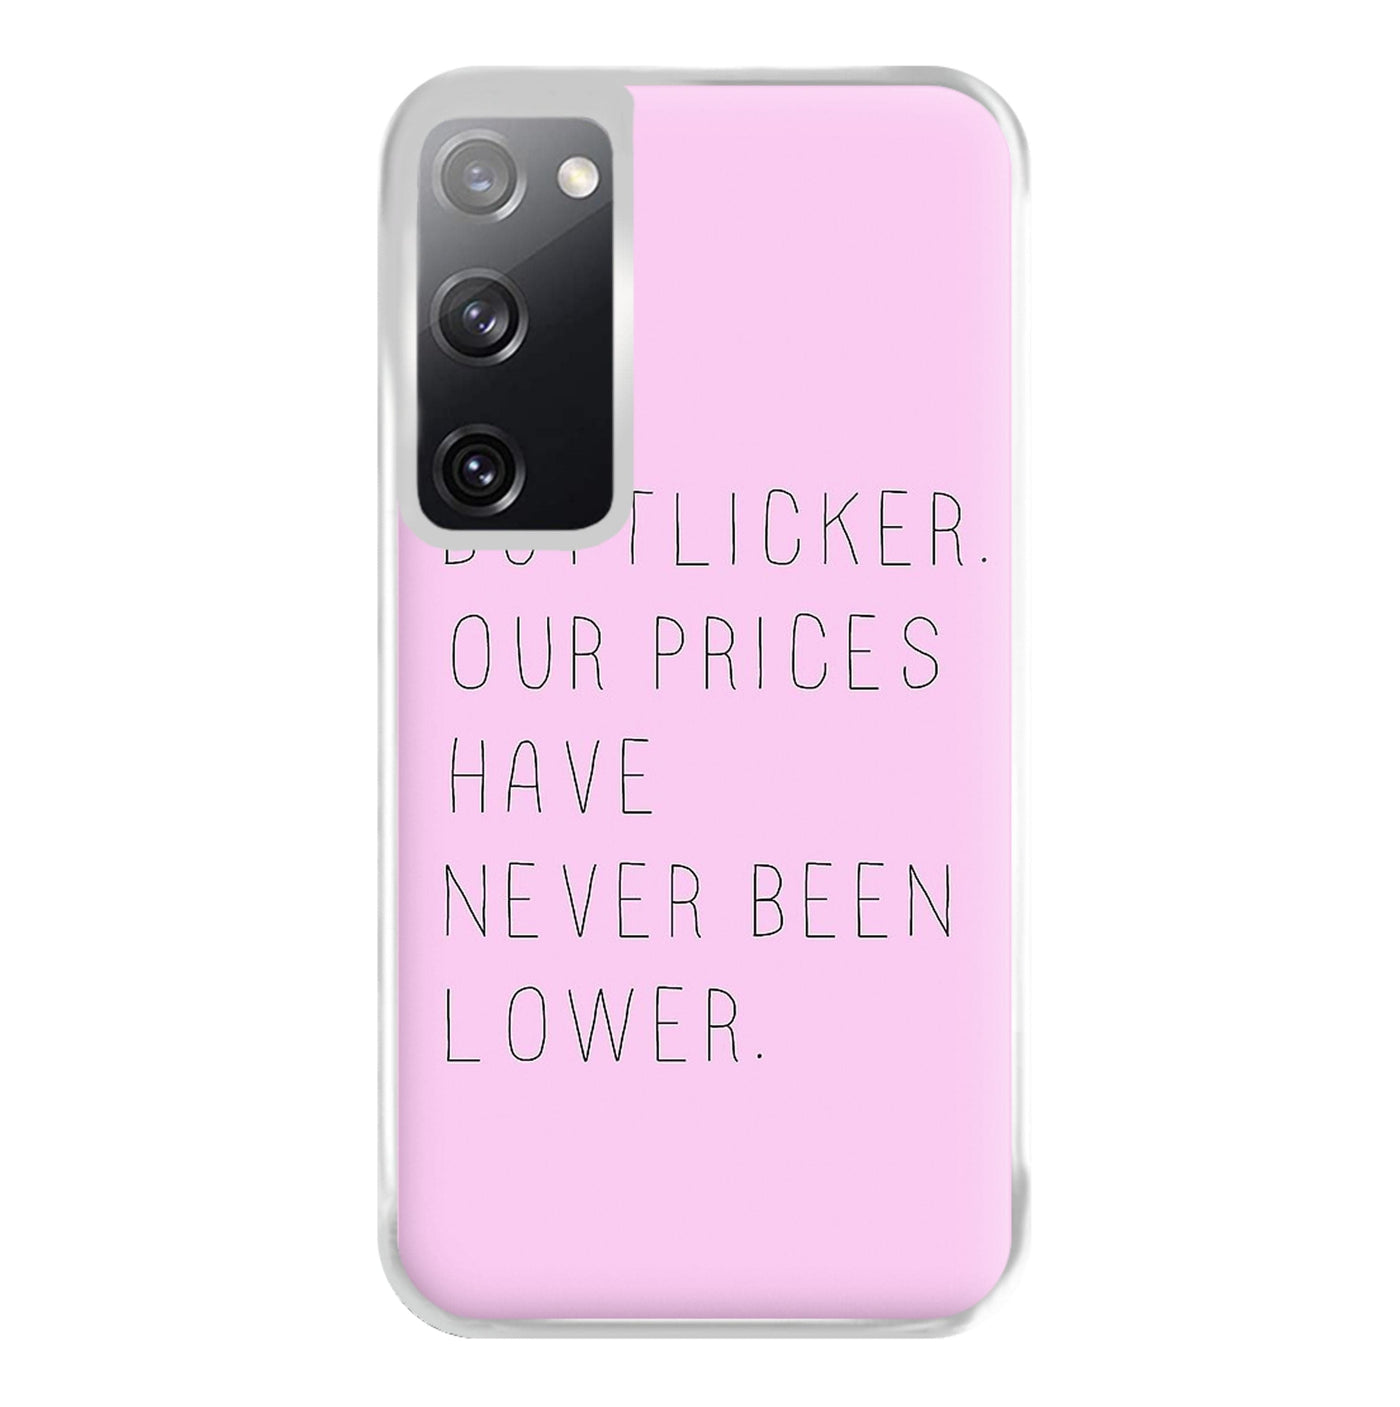 Buttlicker, Our Prices Have Never Been Lower - The Office Phone Case